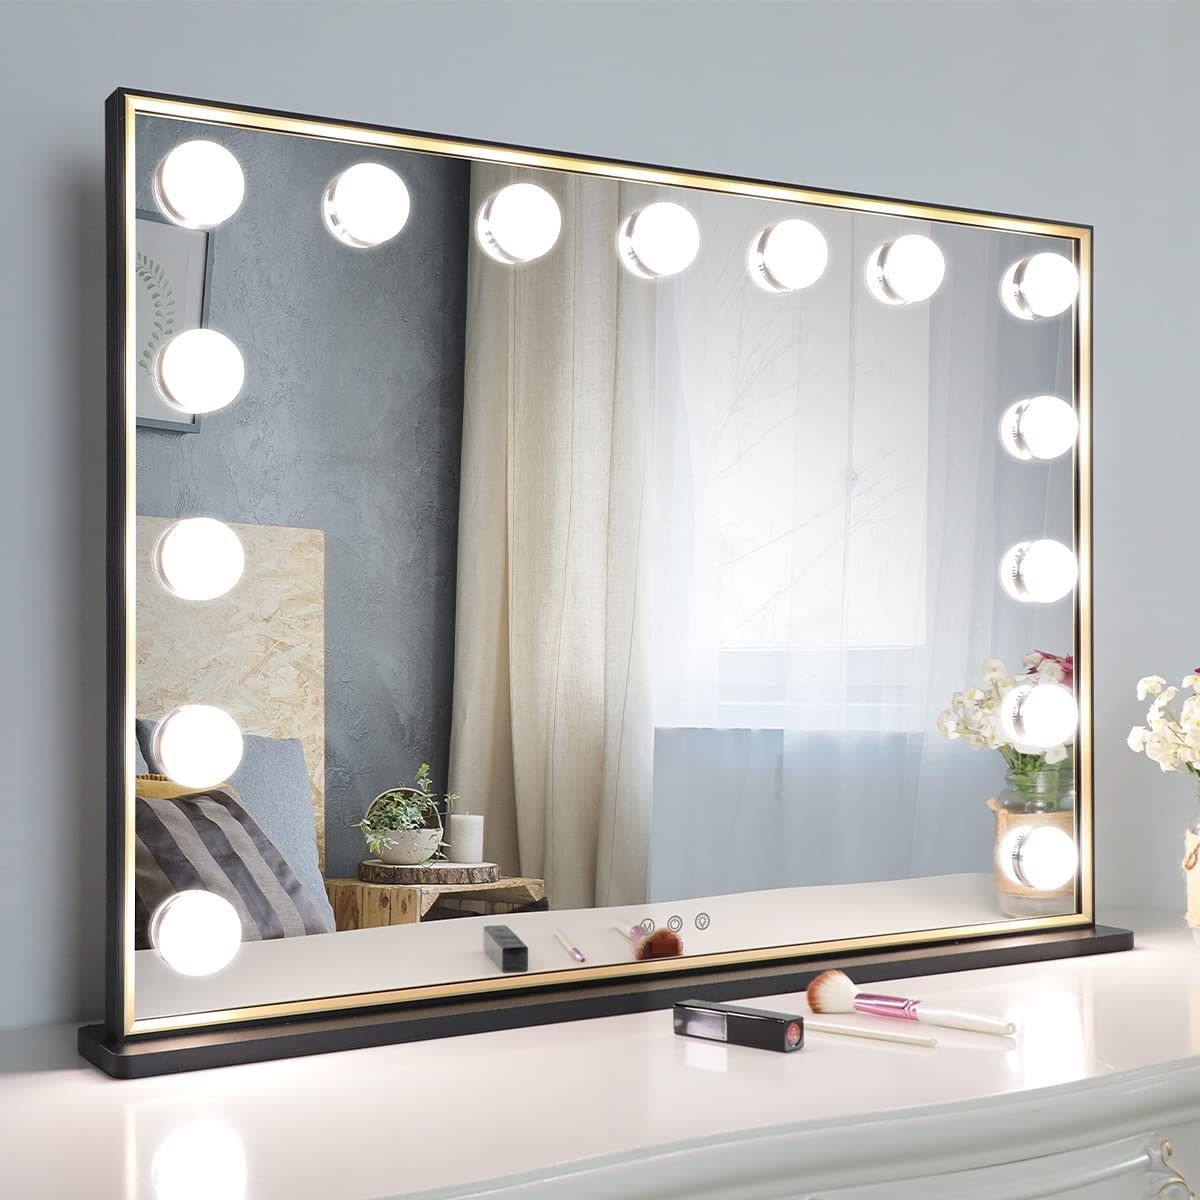 Hollywood Makeup Vanity Mirror with LED Lights and with Smart Button (Black, 77 x 55 cm)